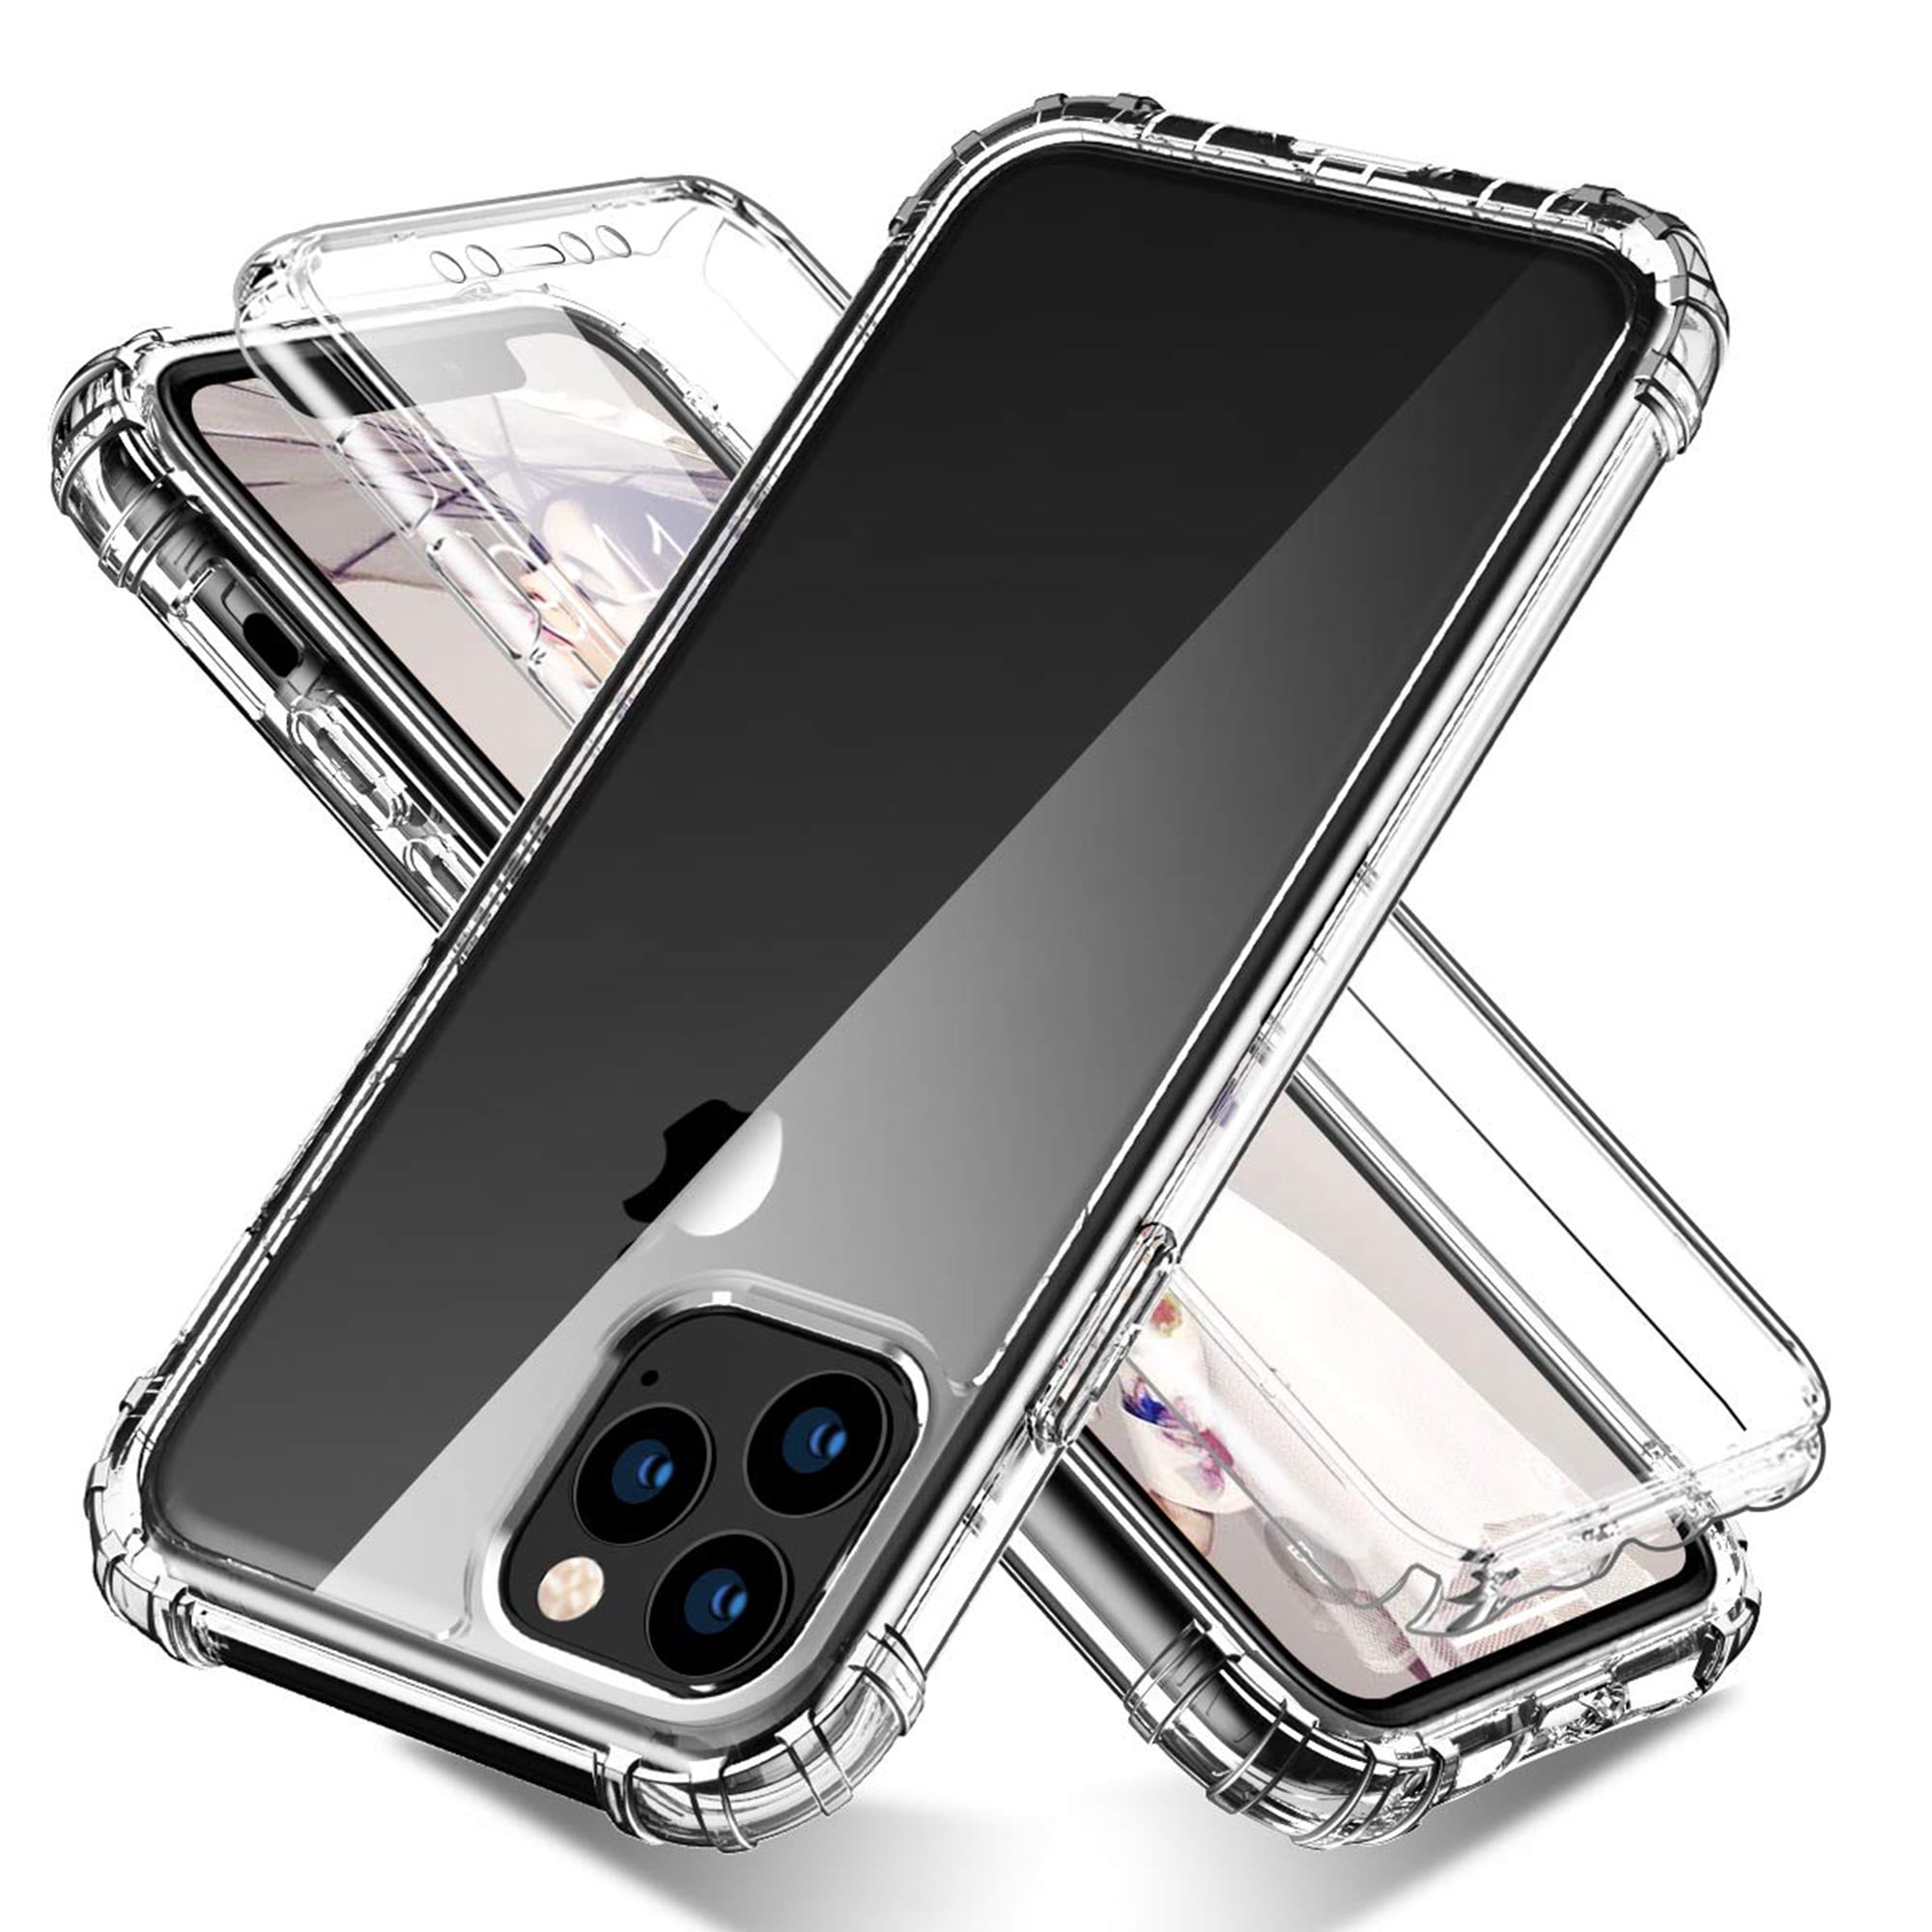 Crystal Clear Built in Screen Protector Heavy Duty Crystal Clear Hard Protective Case with Shockprook TPU Bumer and Rugged PC Back Armor Cover for iPhone 6.5 2019 AMENQ Case for iPhone 11 Pro Max, 